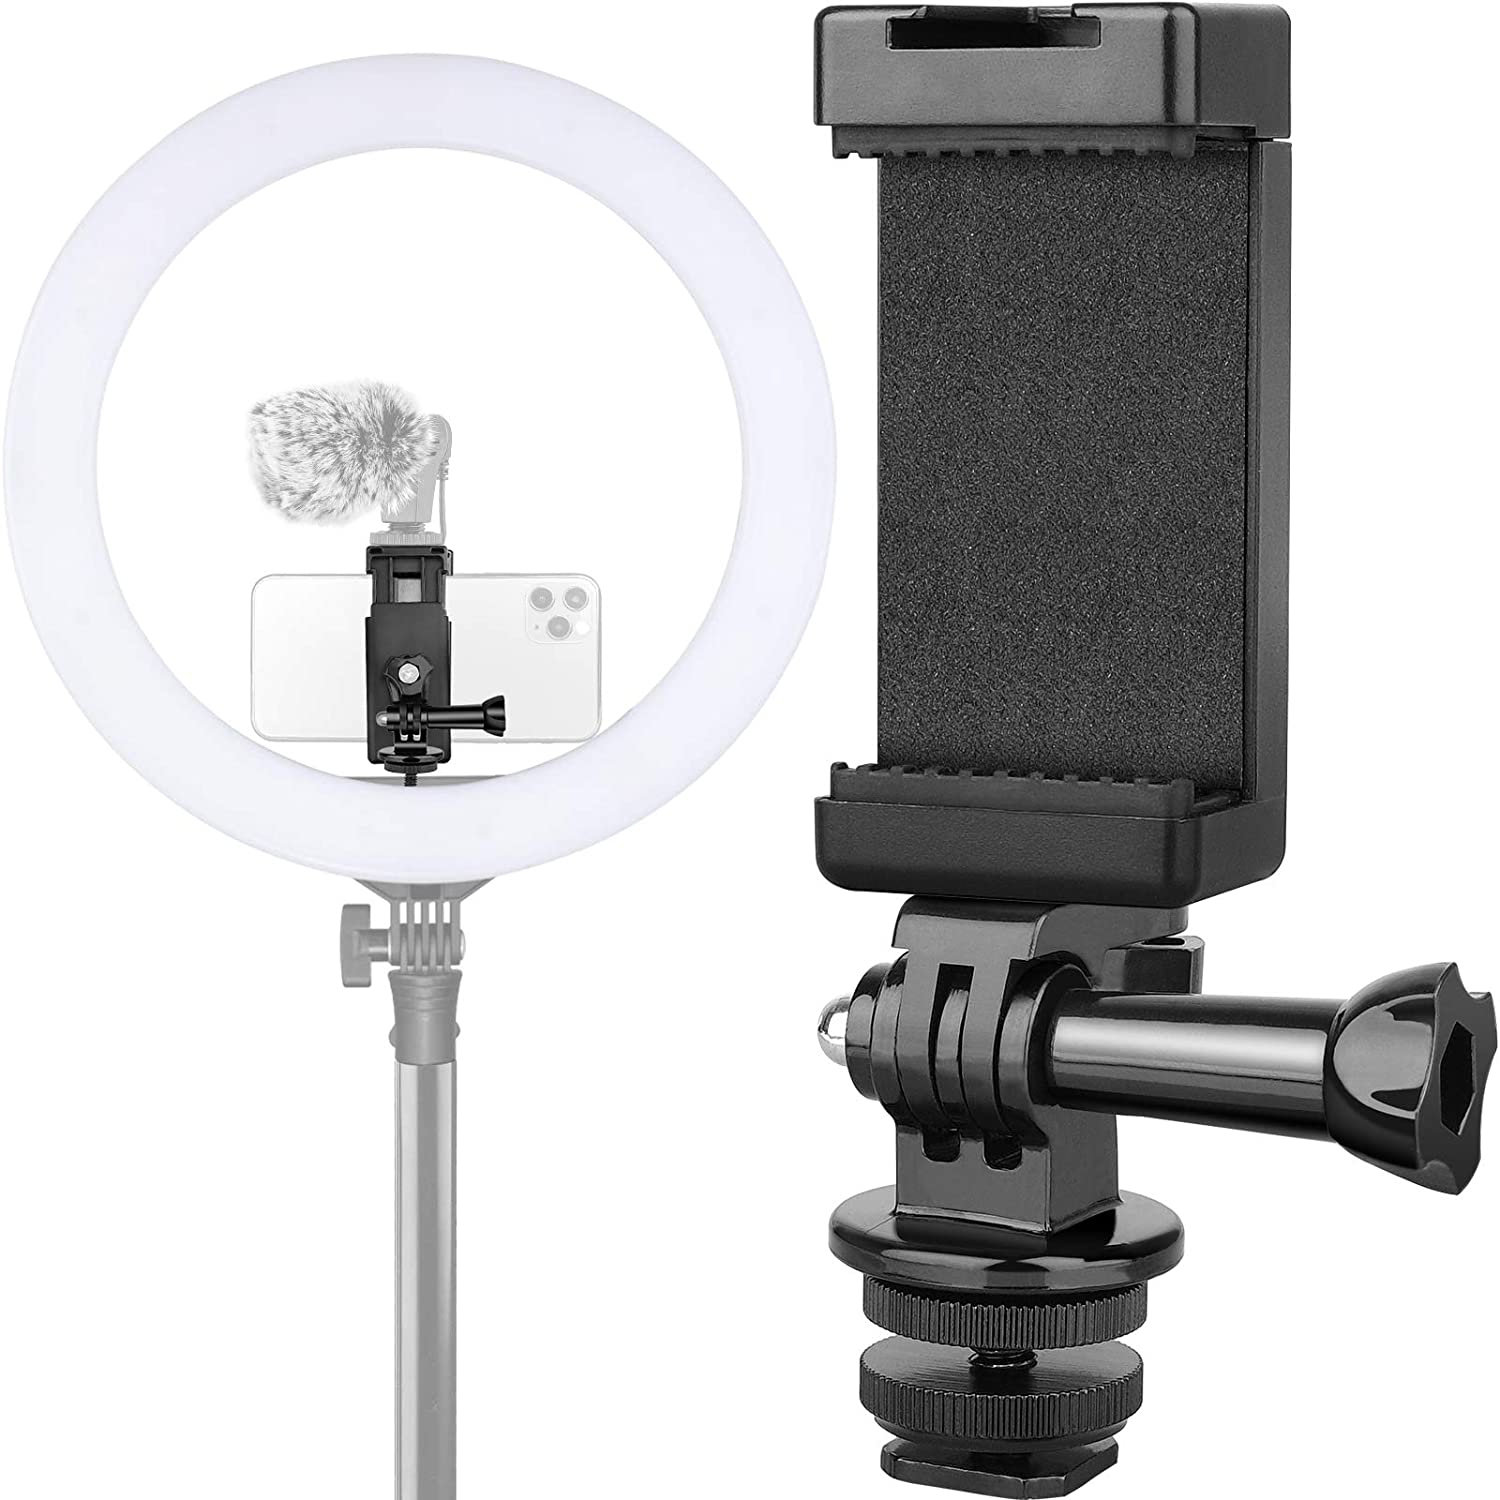 Phone Holder Hot Shoe Mount Adapter with Cold Shoe Mount for Microphone/Flash Light Compatible with Gopro Hero DJI Osmo Action Camera Smartphone, Attach on DSLR Camera/Ring